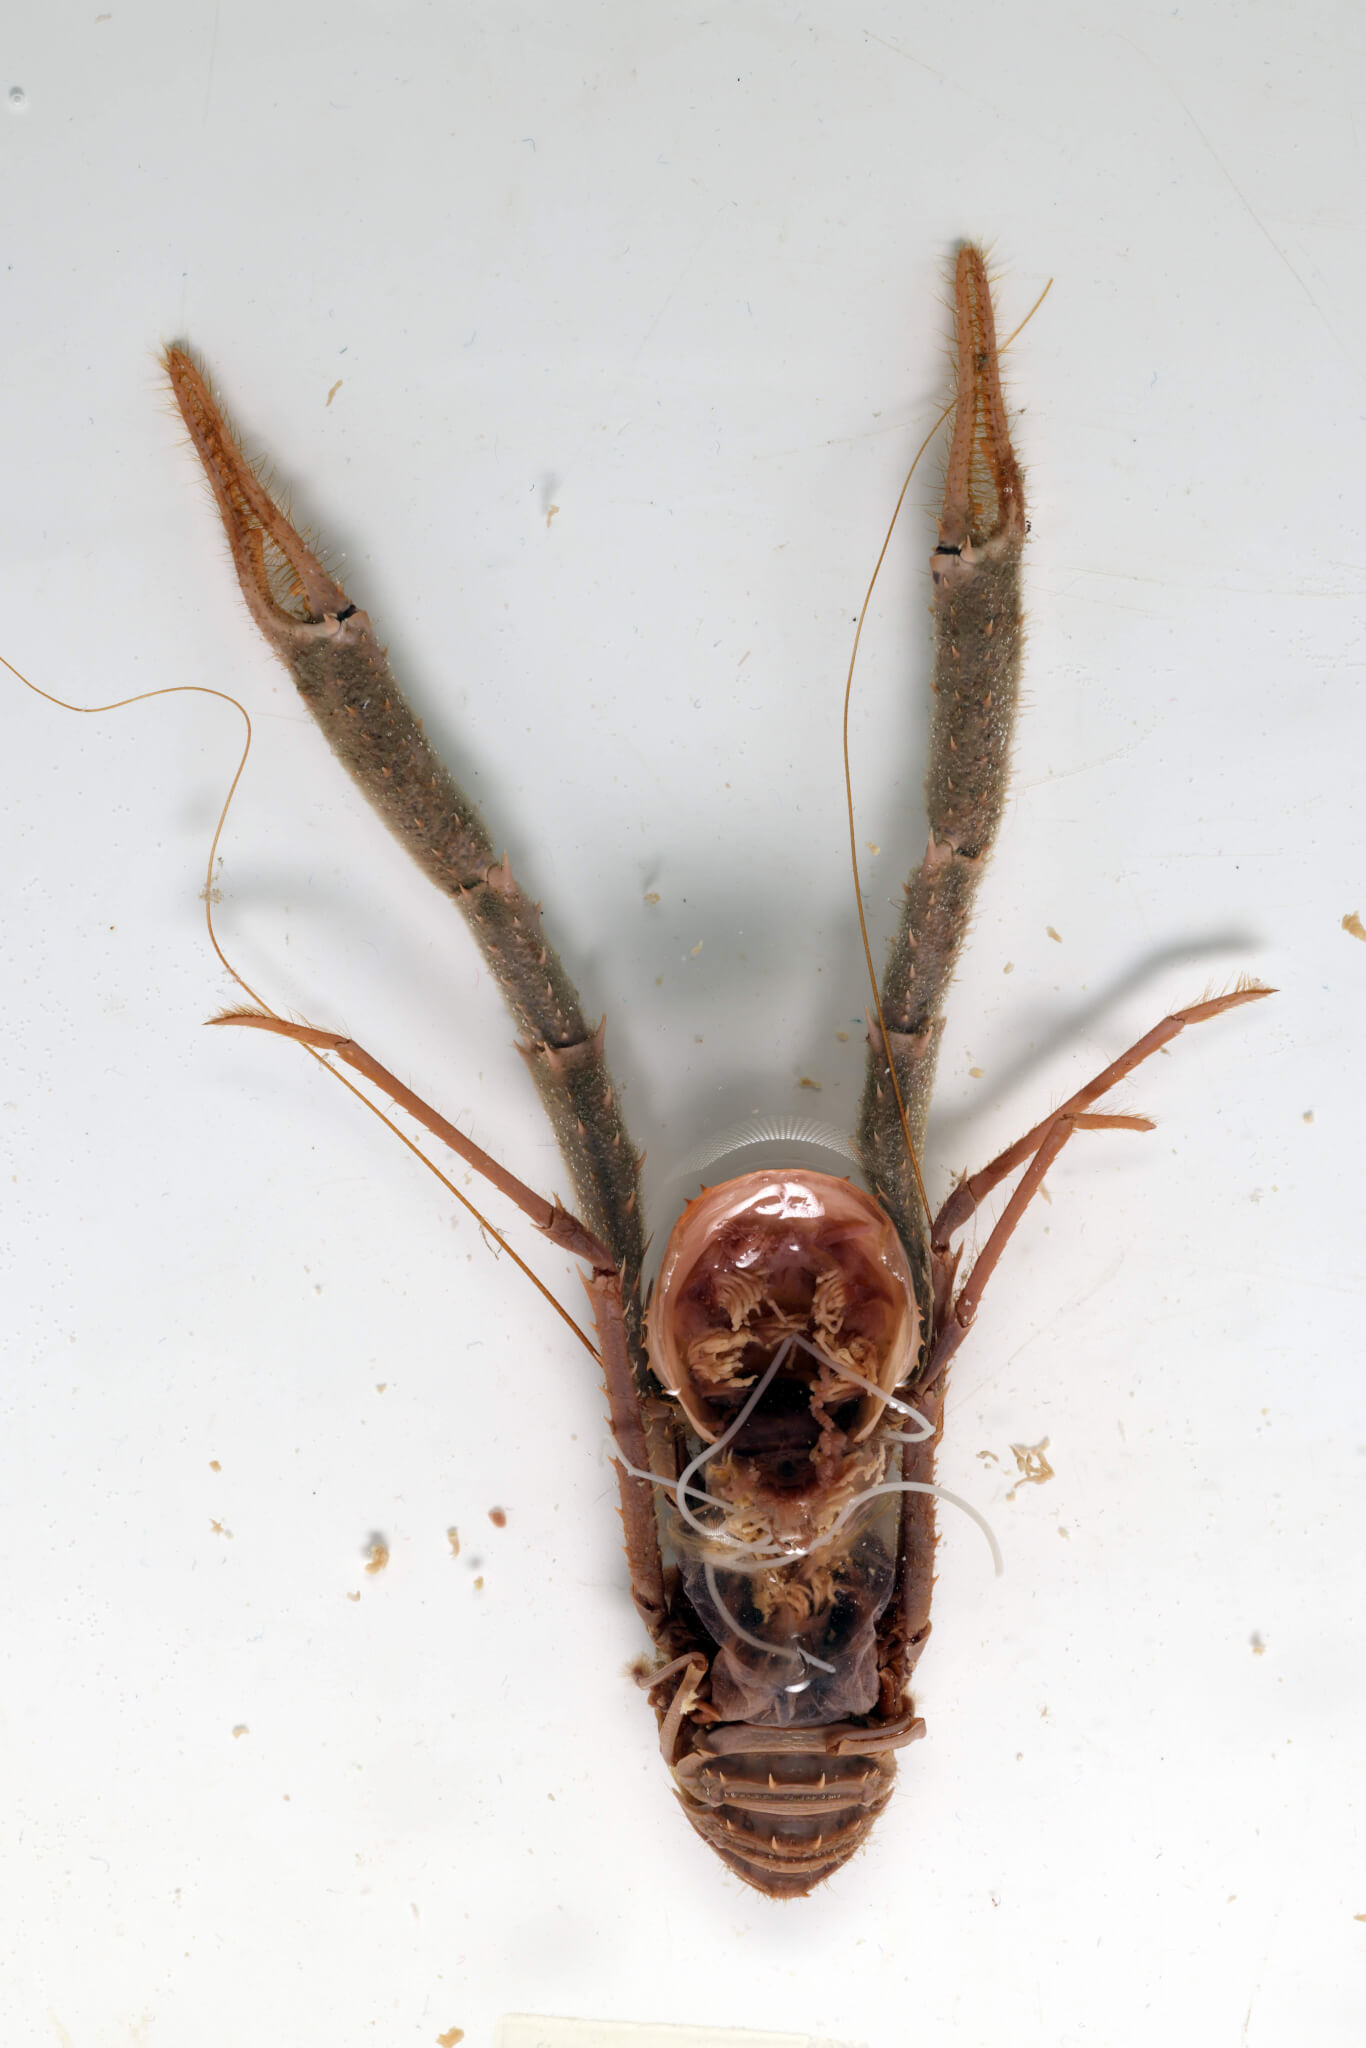 Staged photo of the (dead) squat lobster host Munida sp., from Norway, with a marine hairworm. 